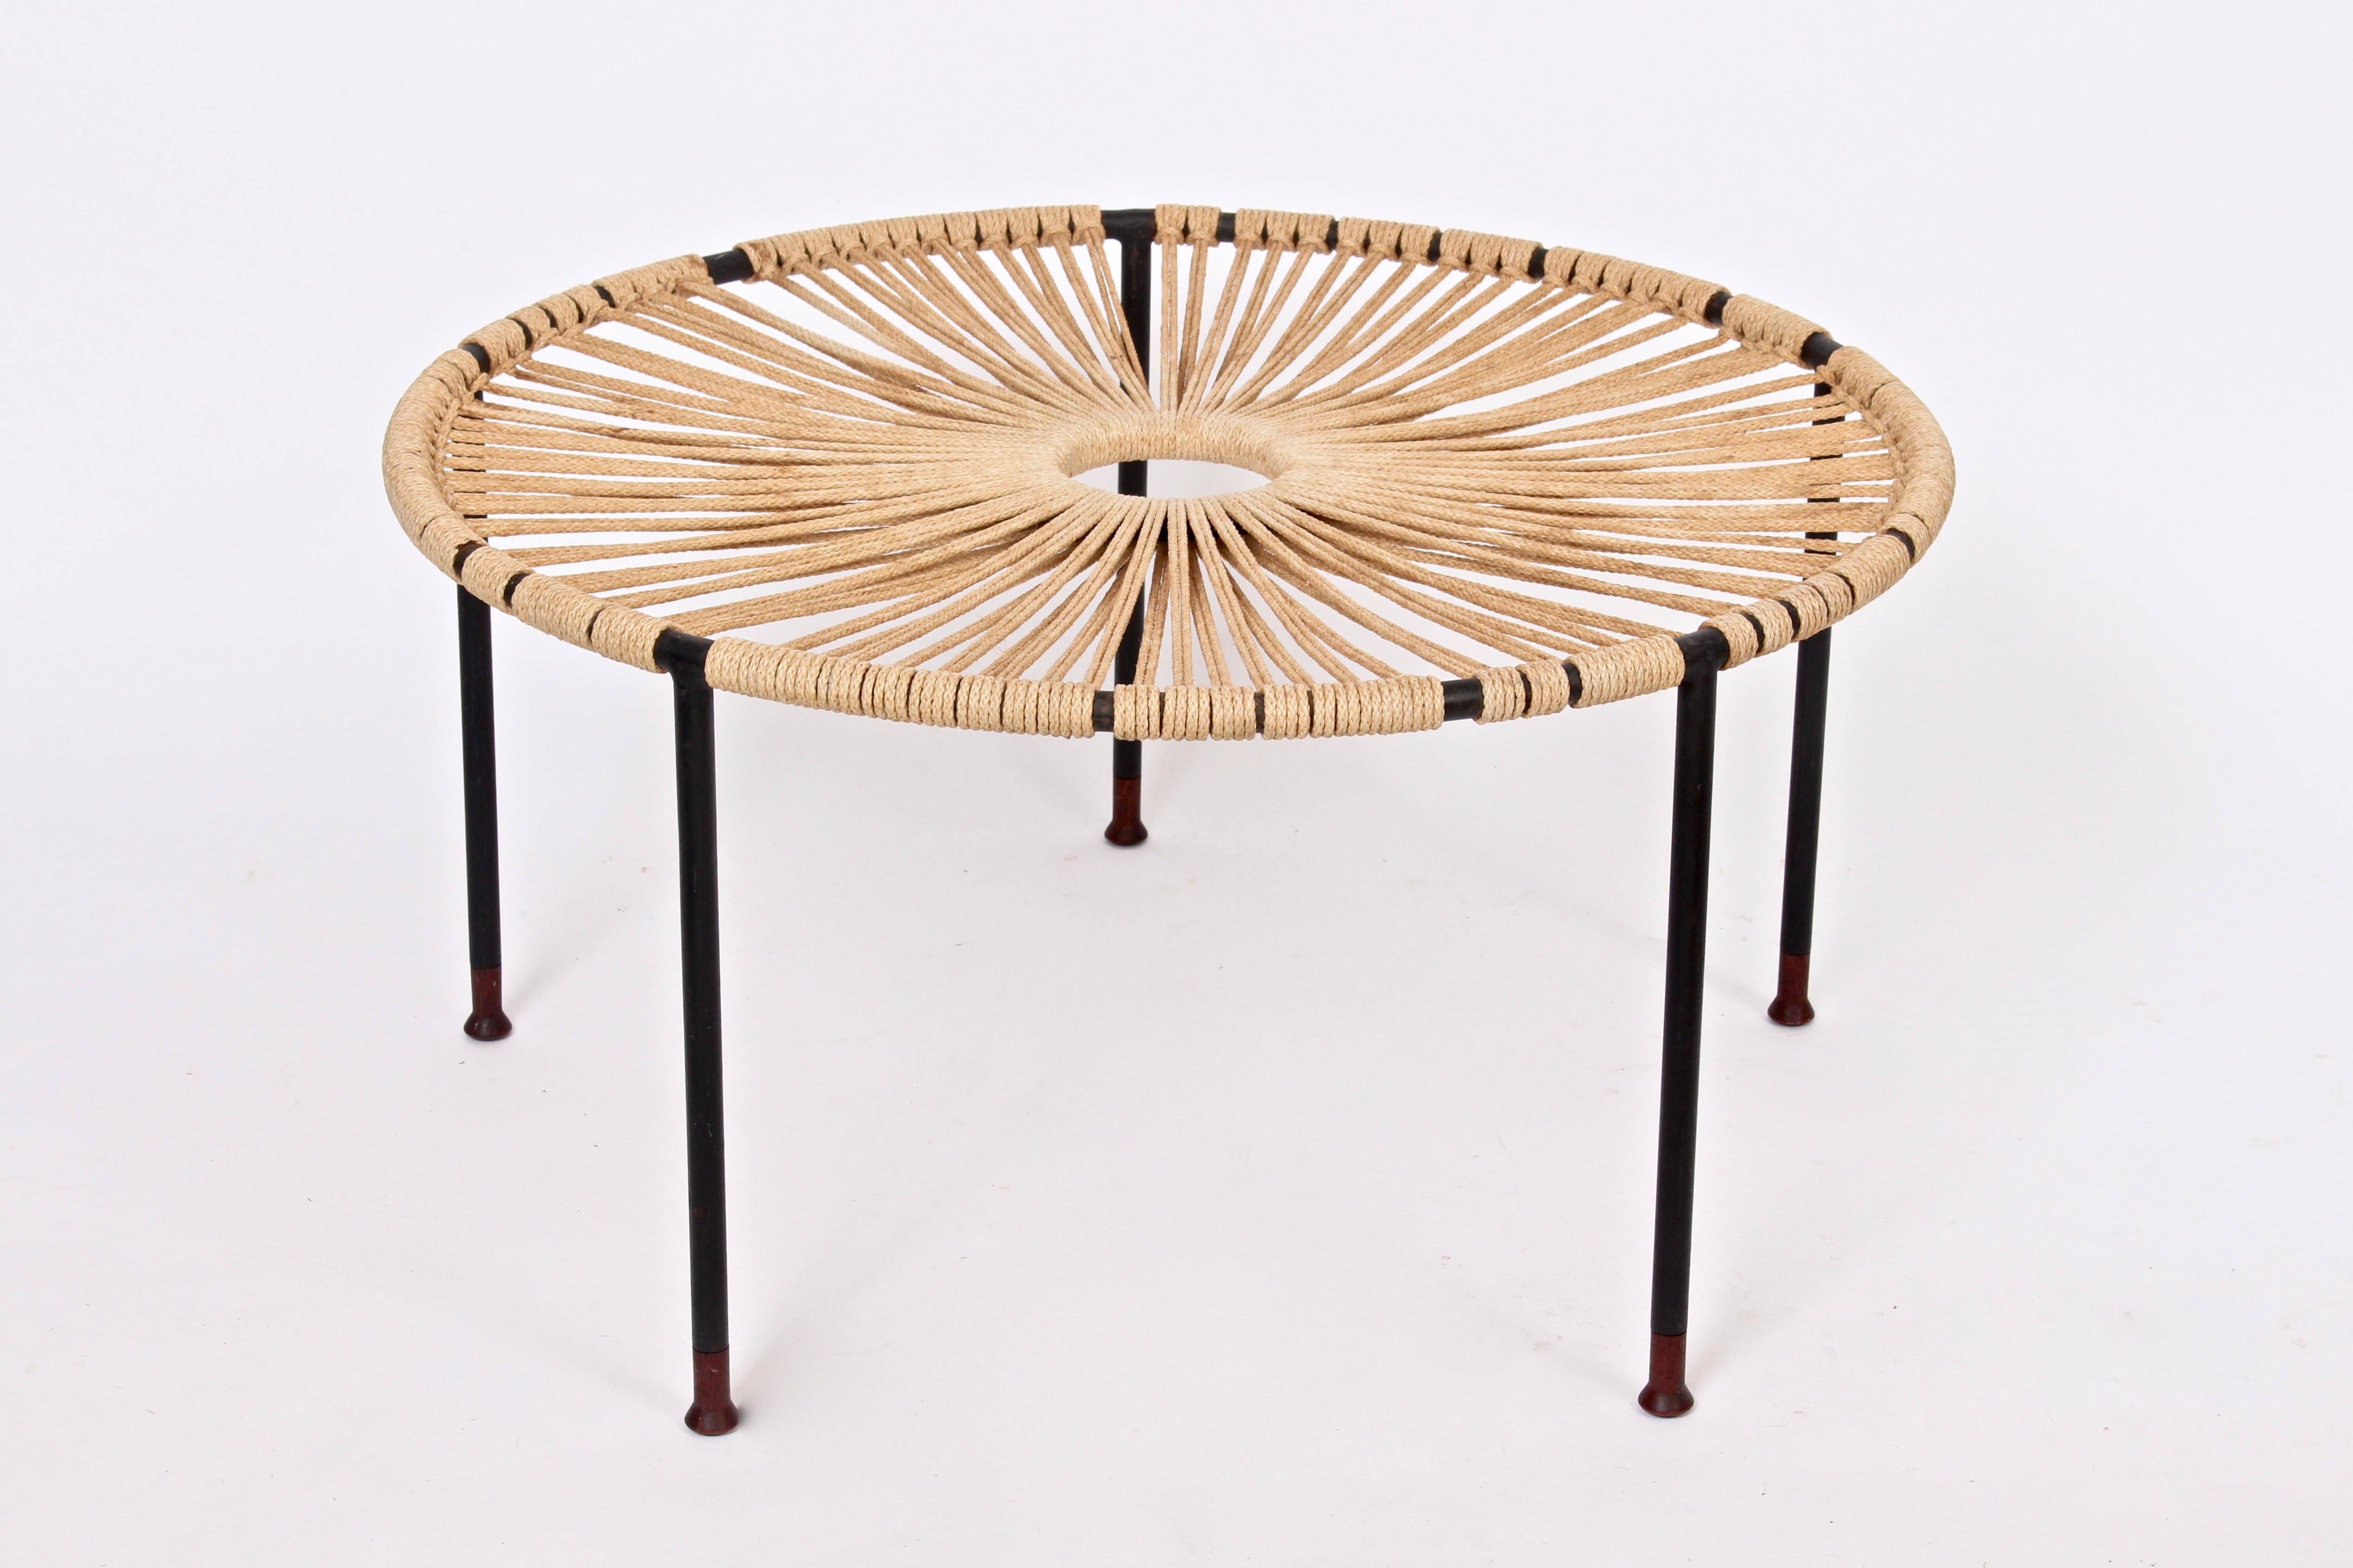 Mid-20th Century Occasional Table, Catch All in black wrought Iron, hemp rope and teak. Featuring a tubular black wrought iron five legged frame wrapped with a sunburst design in taut, textured woven Hemp rope and detailed with hand turned teak